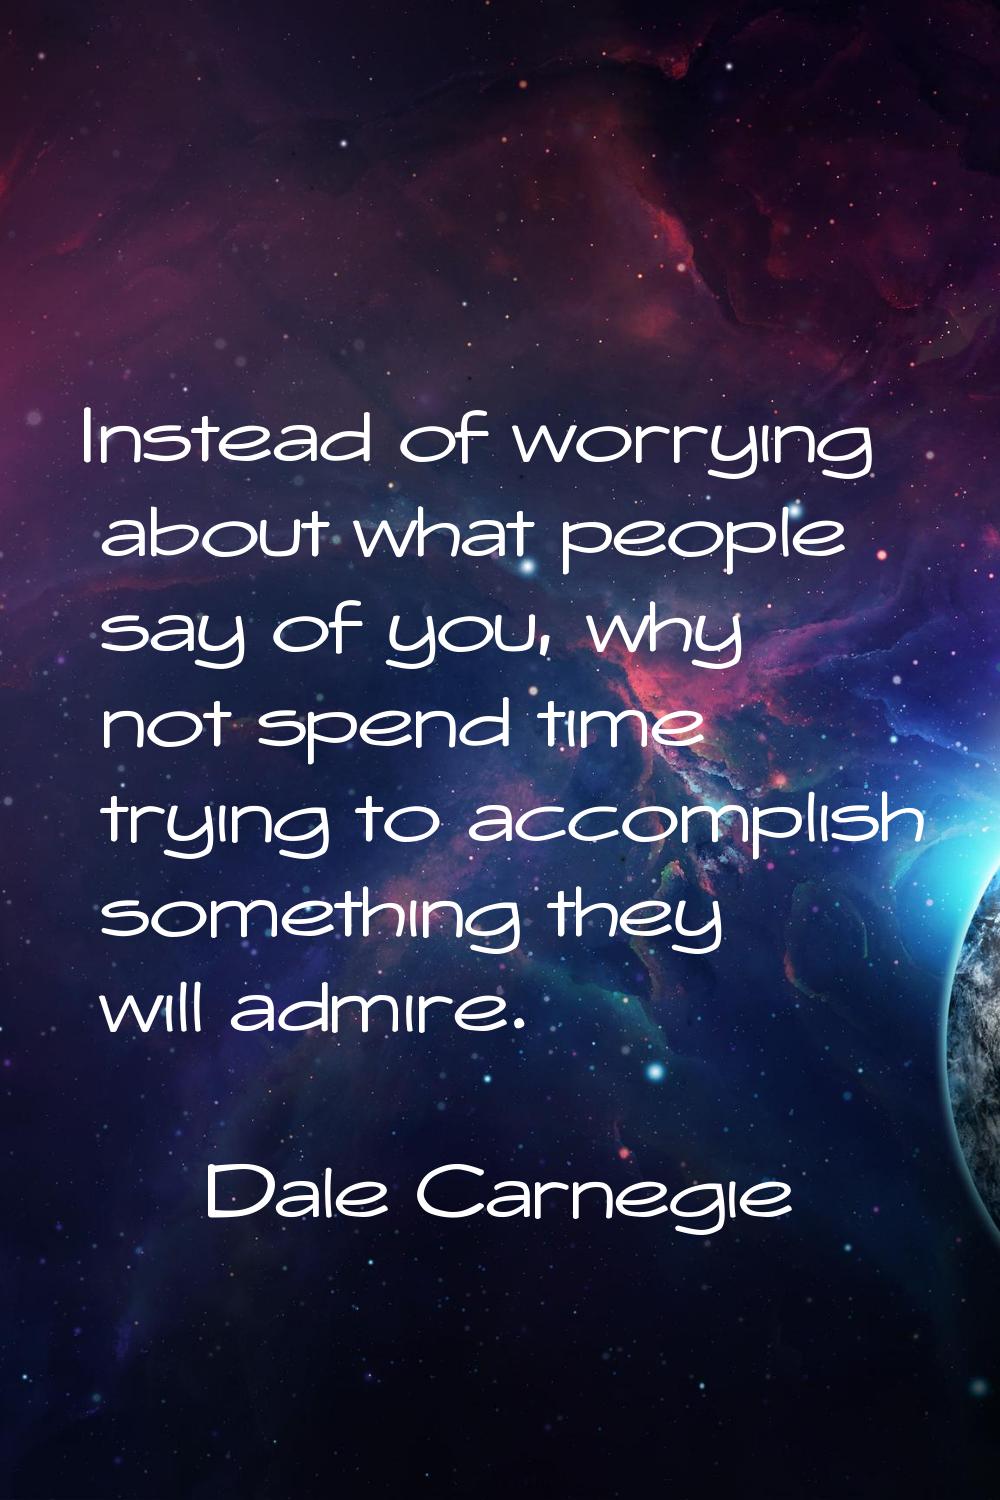 Instead of worrying about what people say of you, why not spend time trying to accomplish something